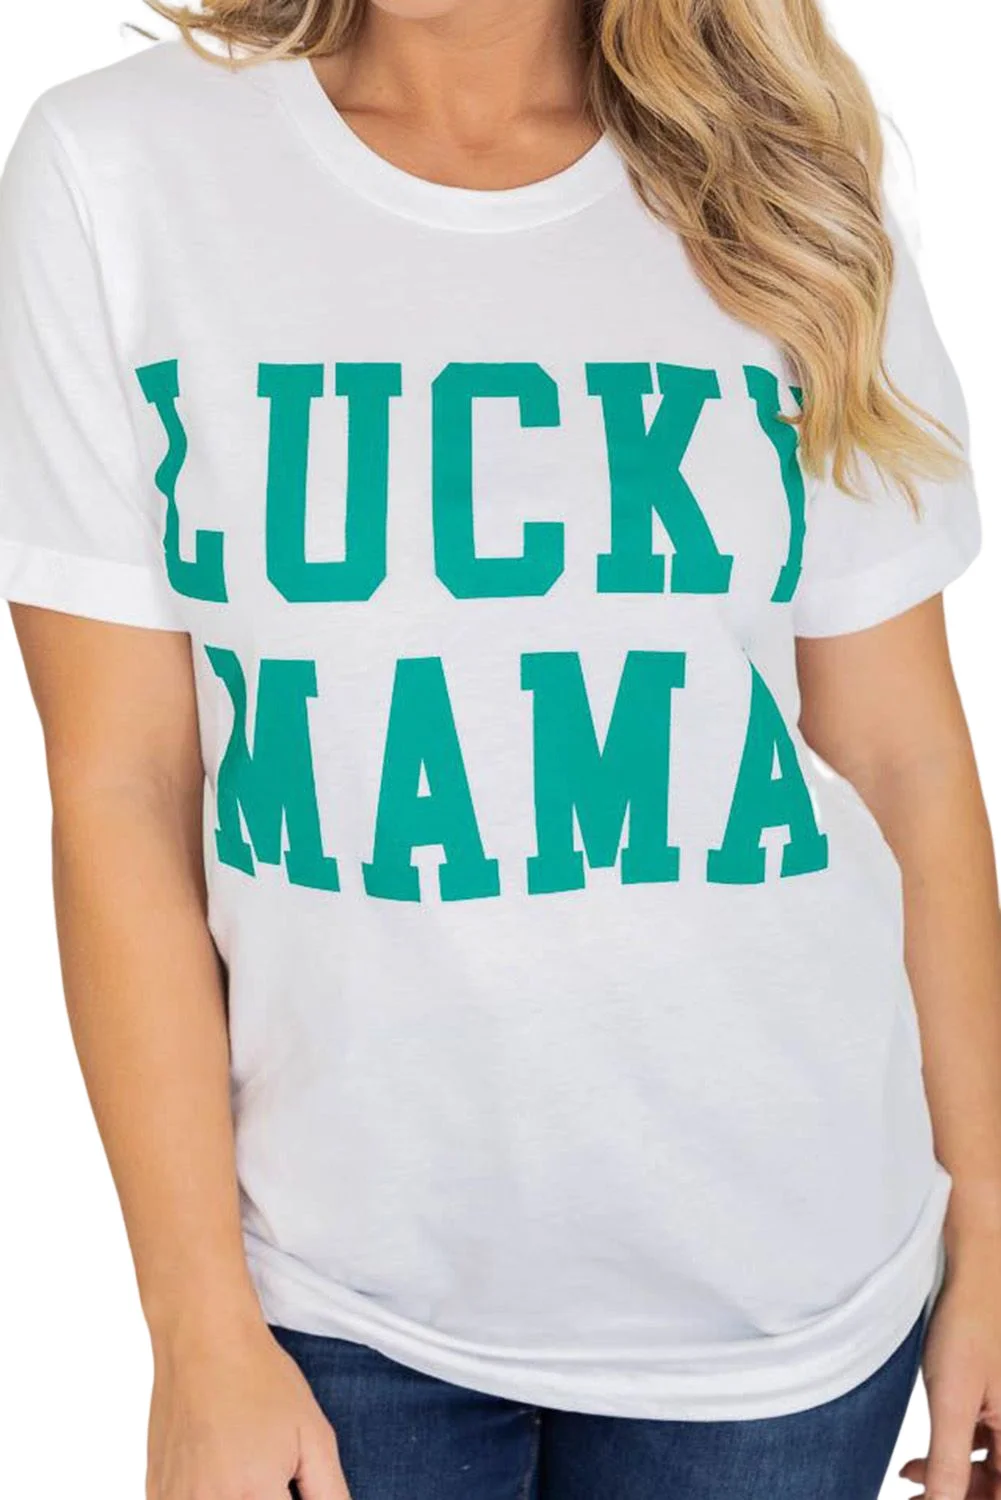 White LUCKY MAMA Letters Print Tee